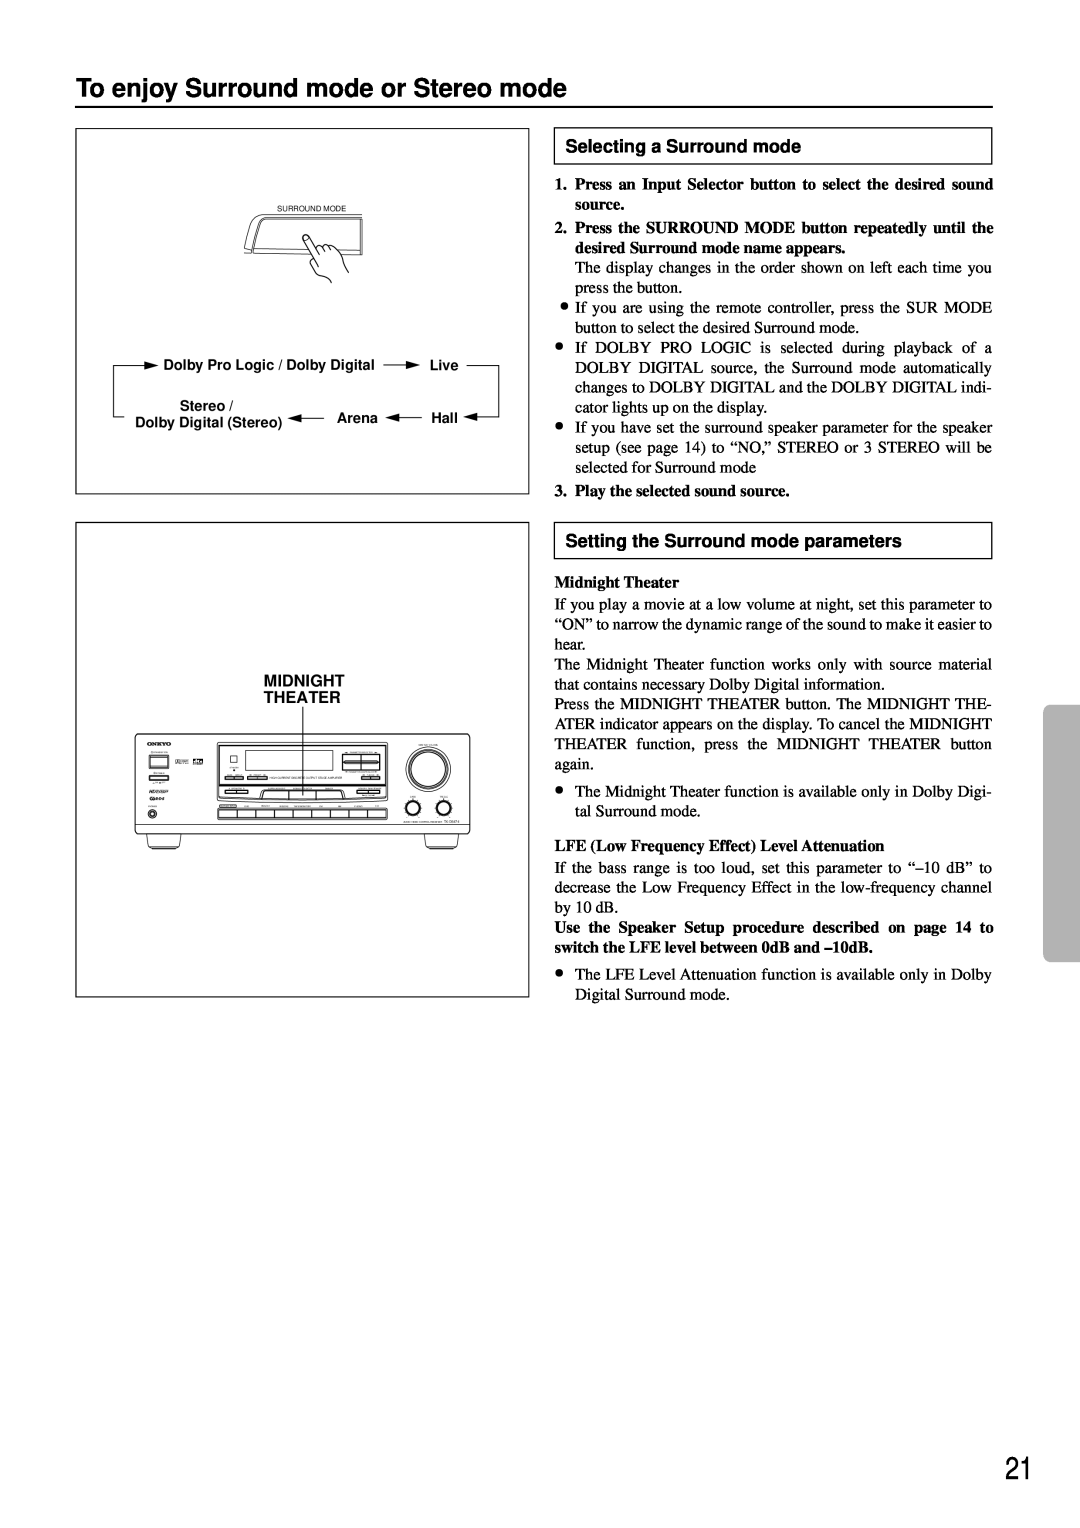 Onkyo TX-DS474 To enjoy Surround mode or Stereo mode, Selecting a Surround mode, Setting the Surround mode parameters 